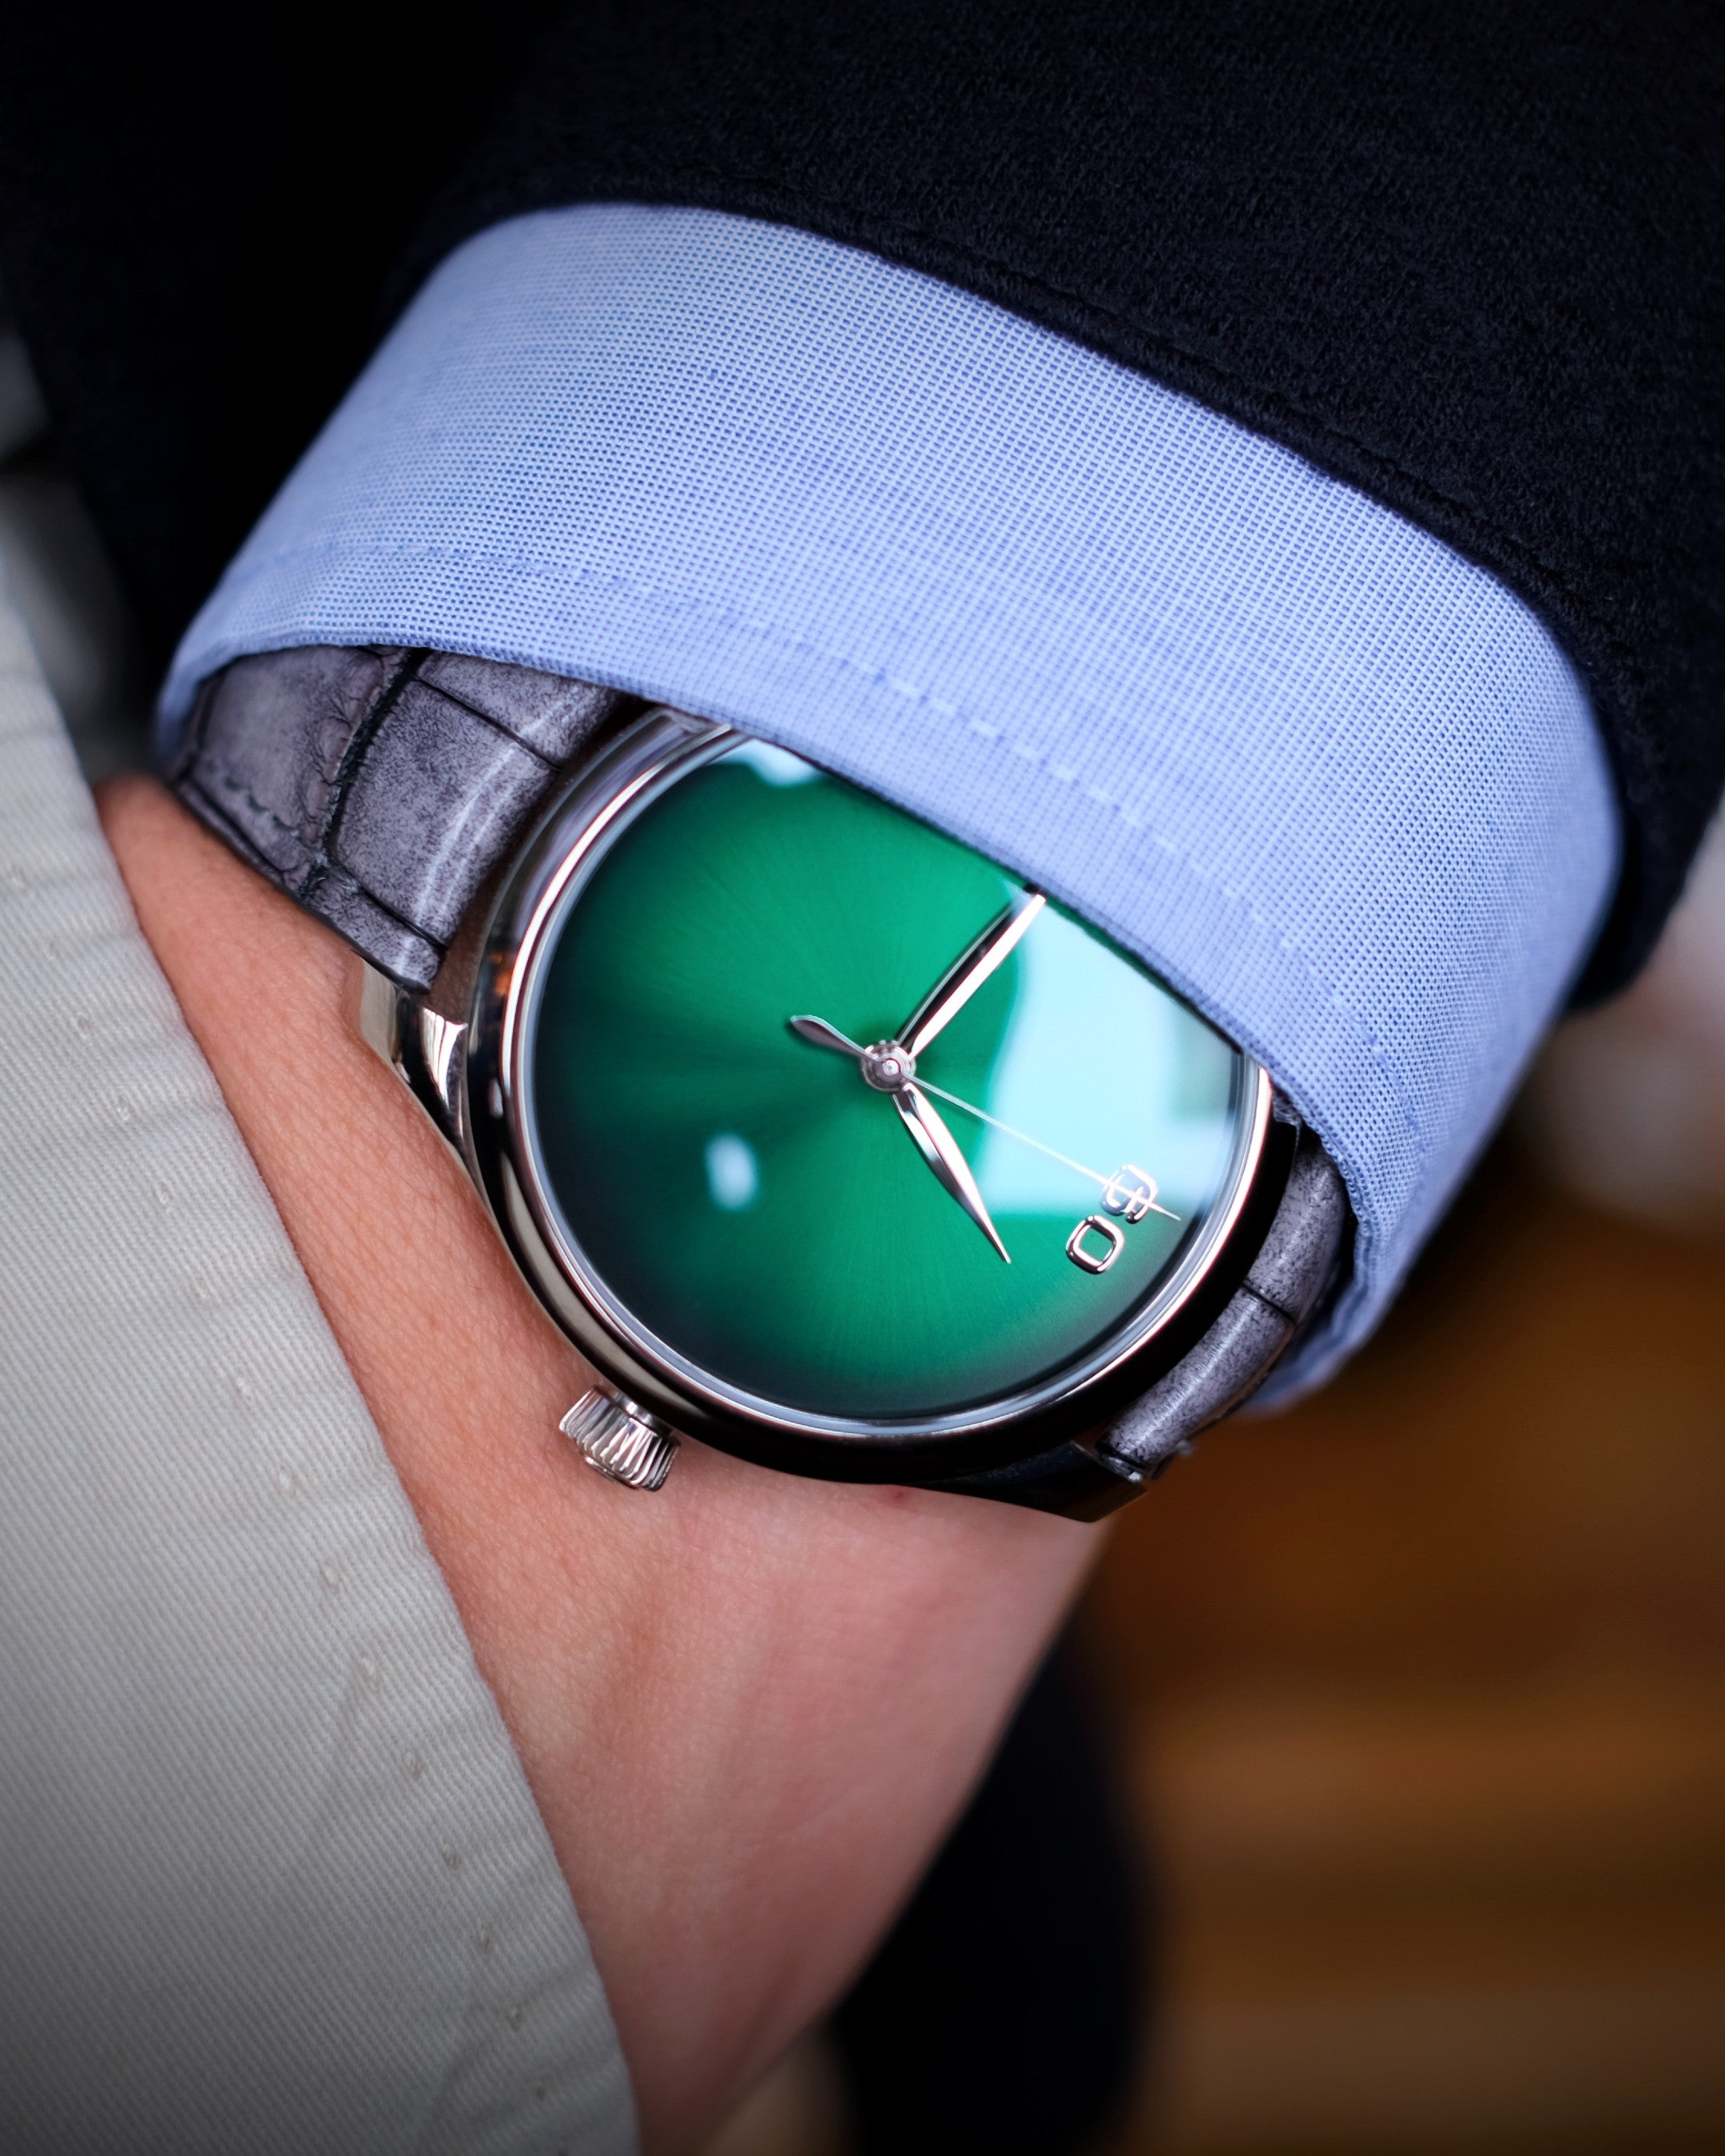 H. Moser & Cie. Oriental 60th Anniversary Endeavour Limited Edition